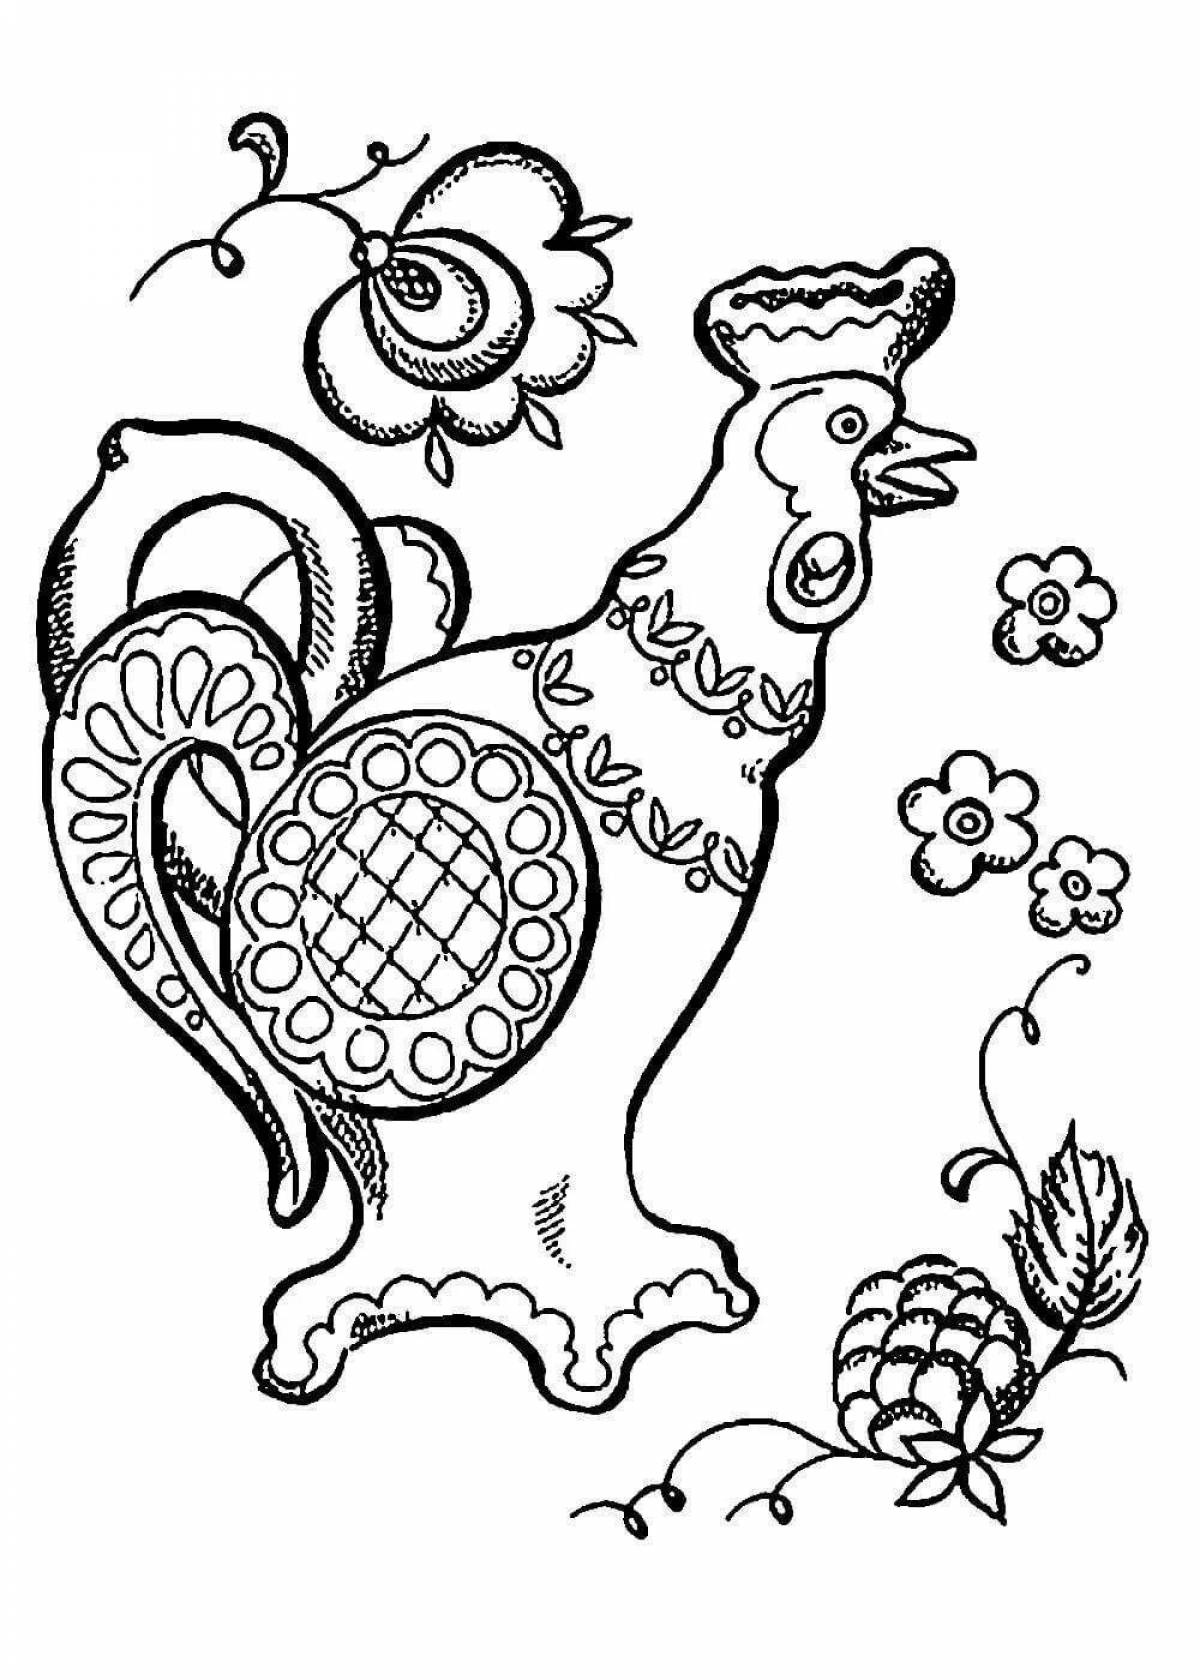 Amazing craft coloring pages for kids